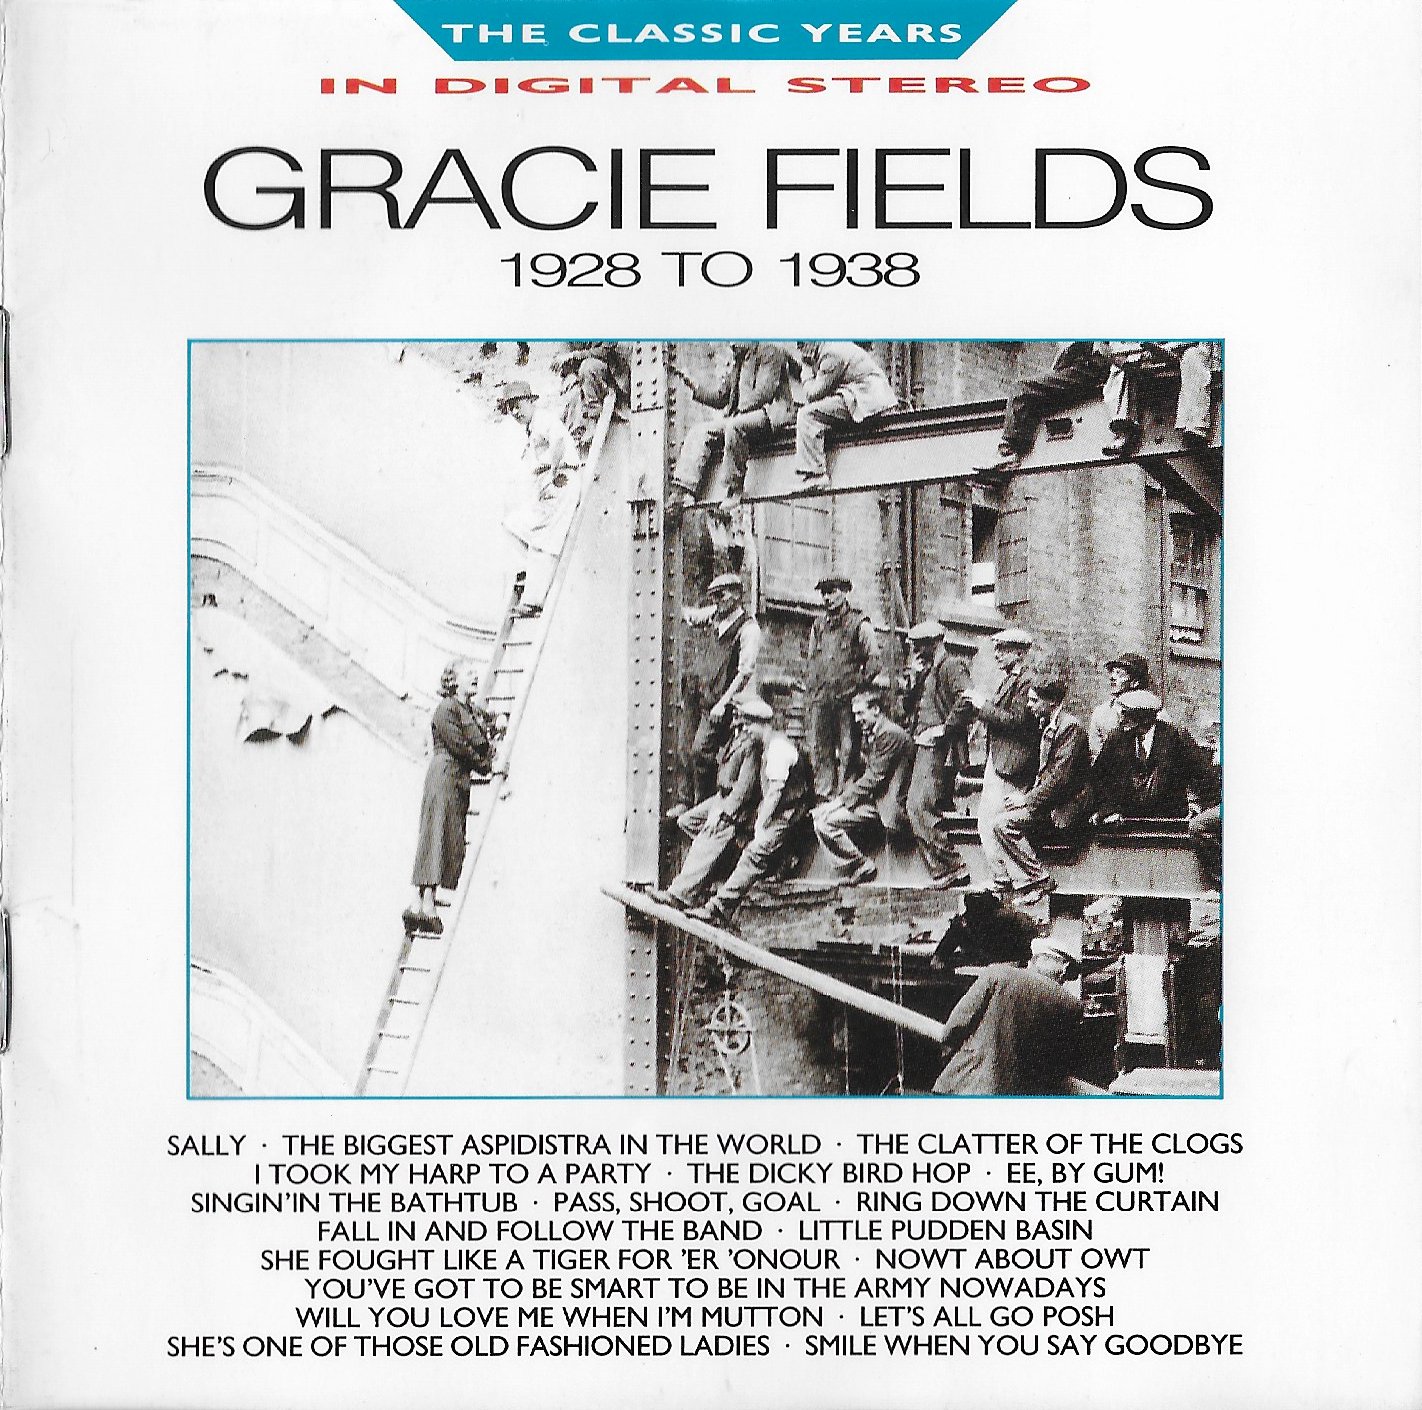 Picture of Classic years - Gracie Fields 1928 - 1938 by artist Gracie Fields from the BBC cds - Records and Tapes library